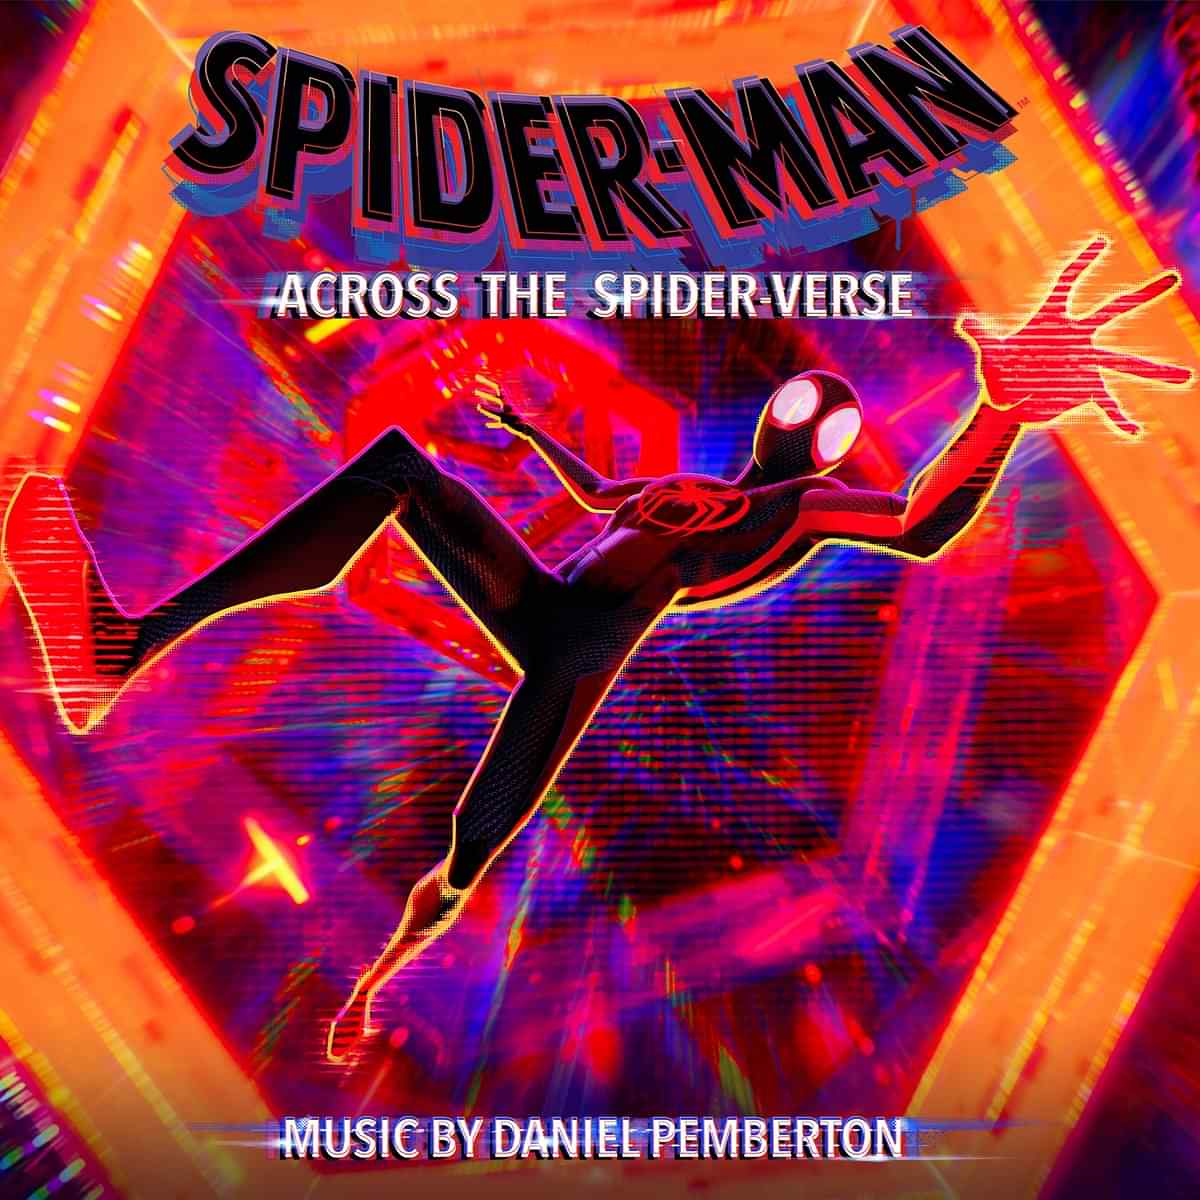 Spider-Man: Into the Spider-Verse with Miles Morales opens at $35